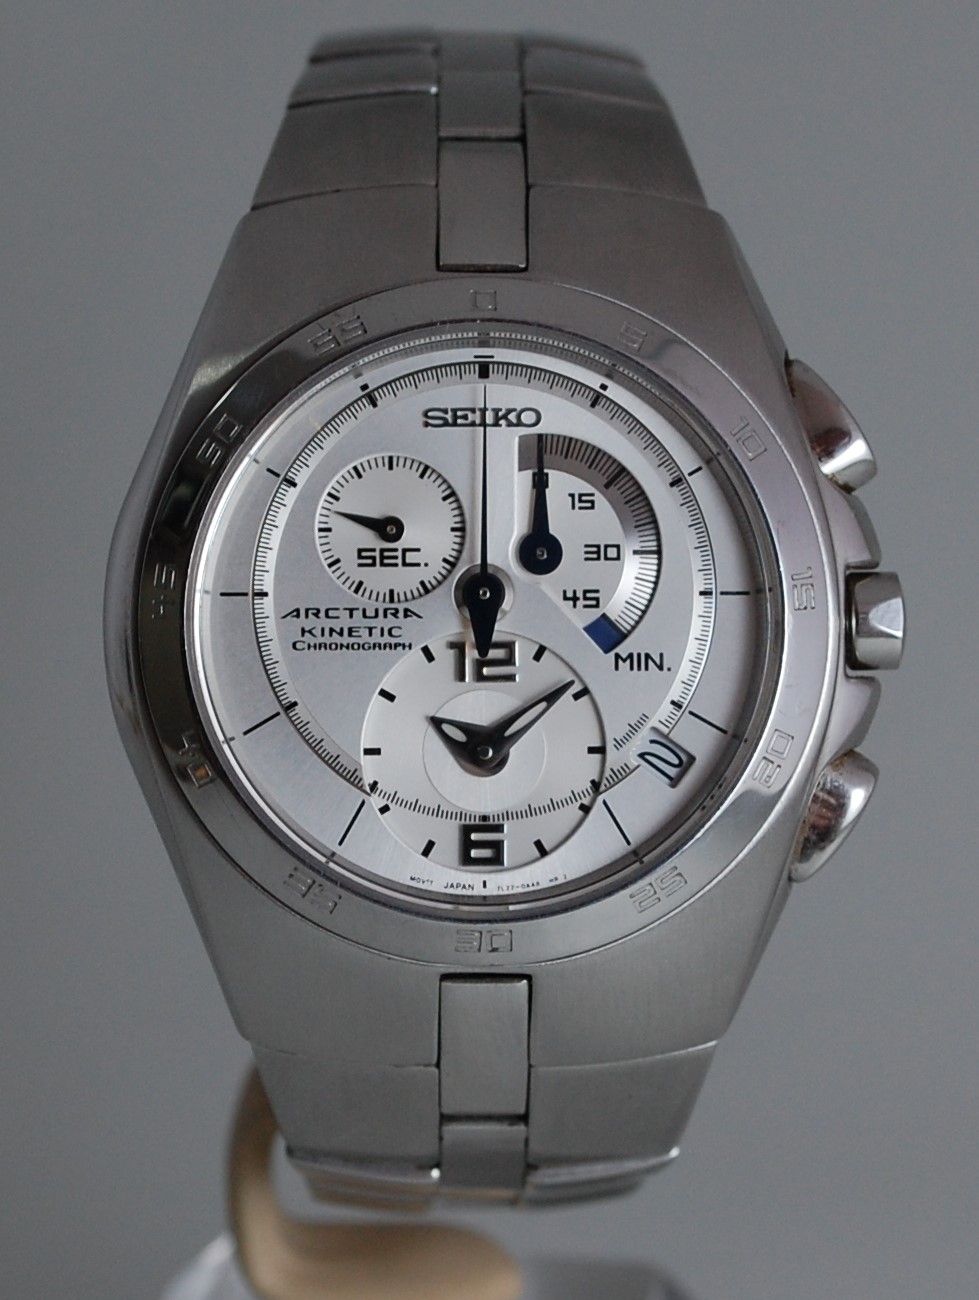 SOLD 2003 Seiko Arctura Chronograph with box - Birth Year Watches